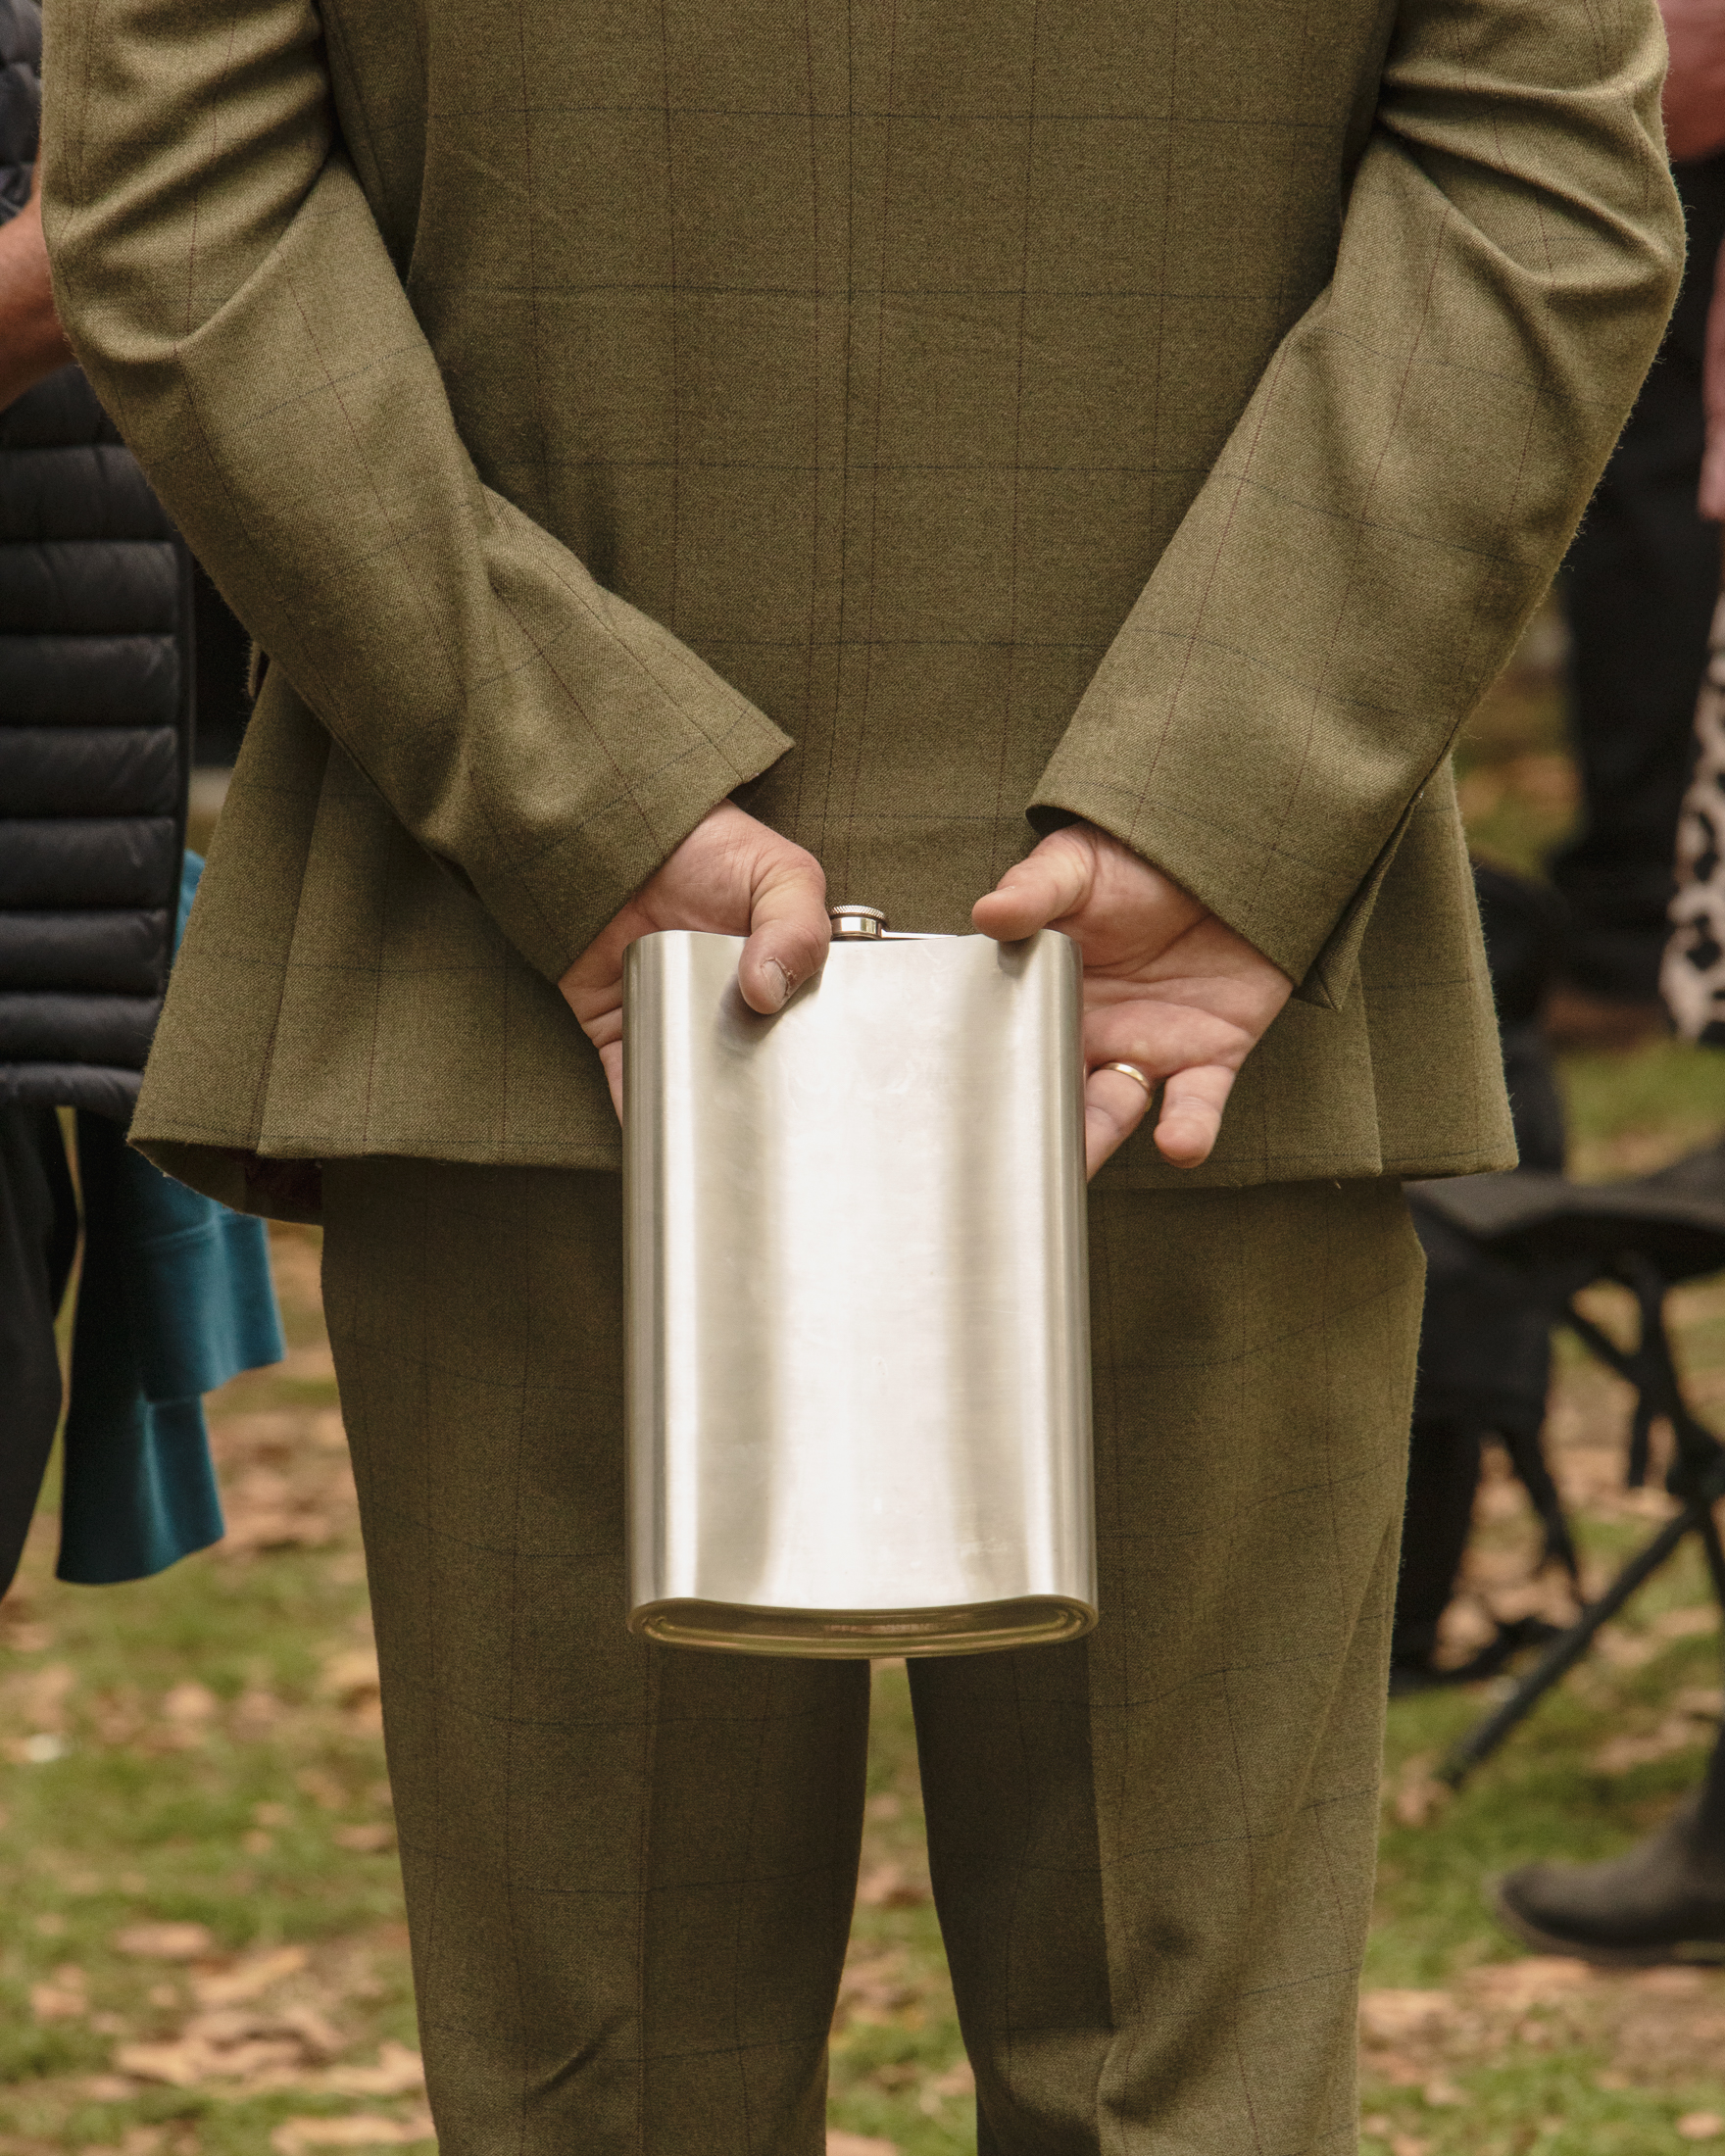 Man holding giant alcohol flask during Queen Elizabeth II's funeral